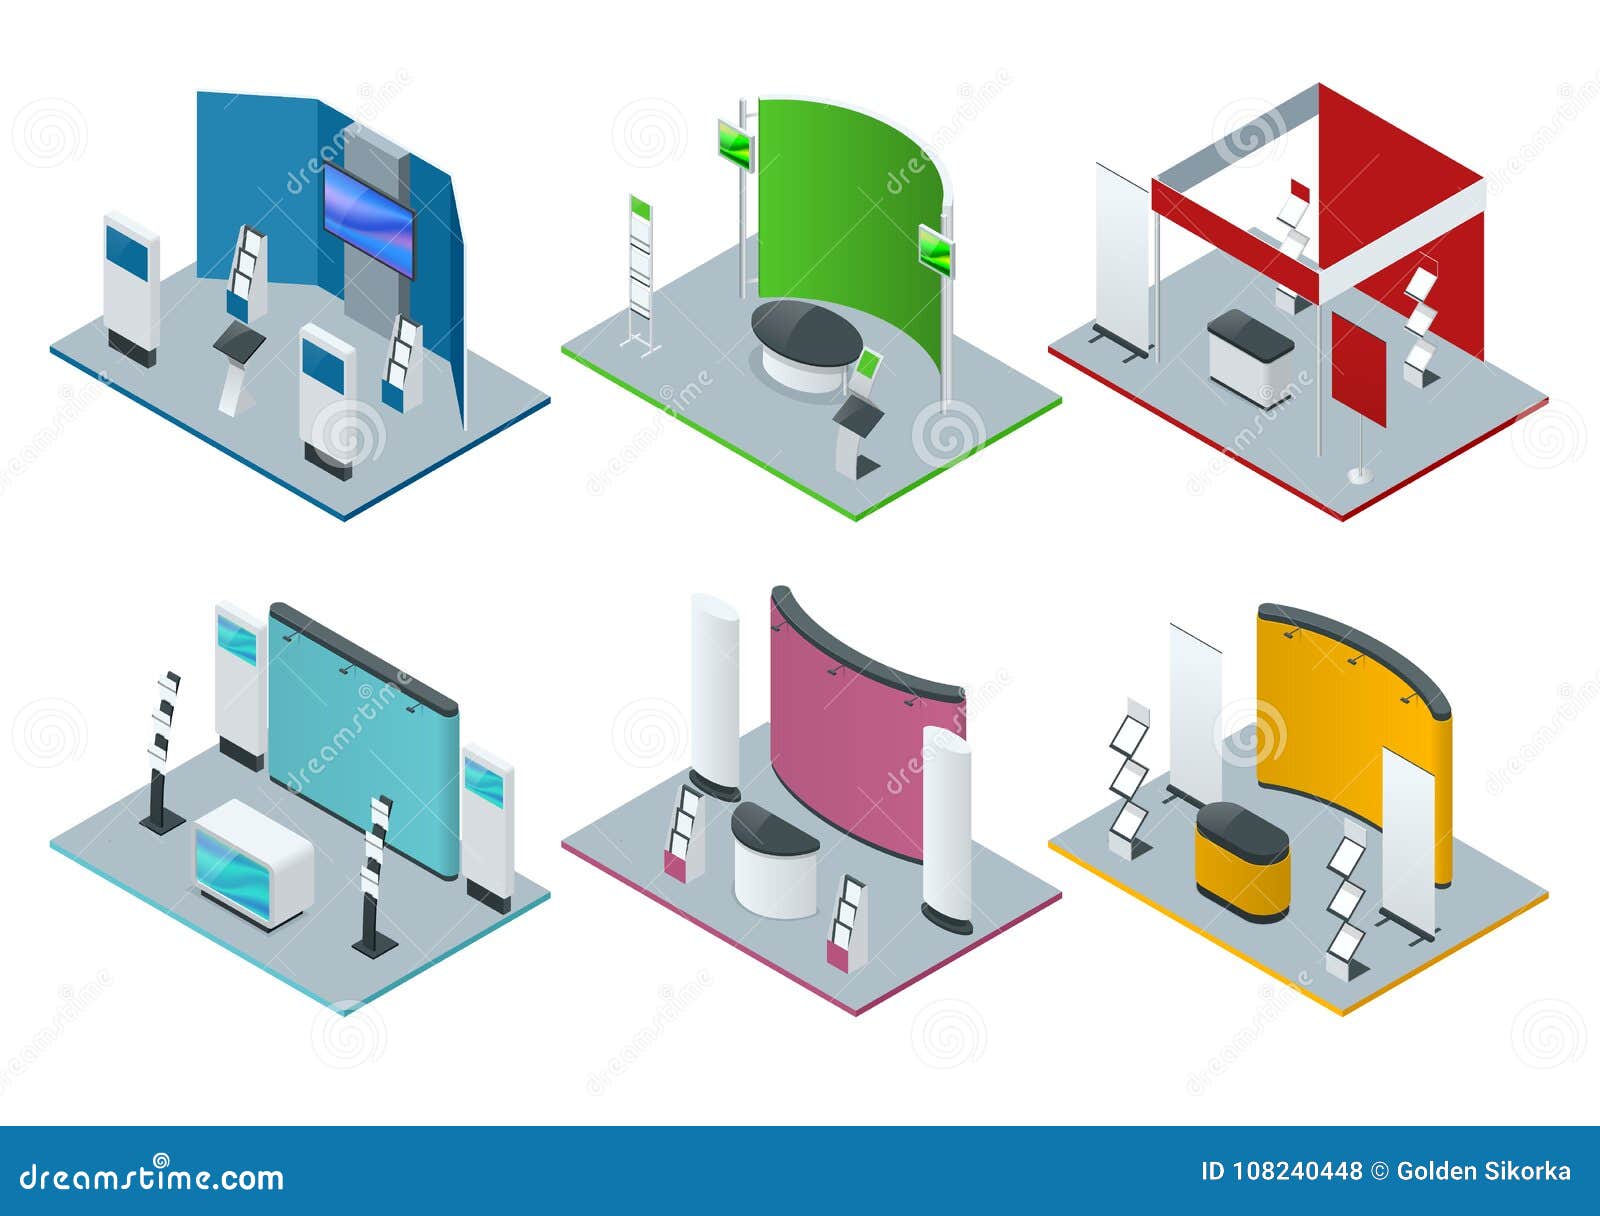 isometric set of promotional stands or exhibition stands including display desks shelves and handout